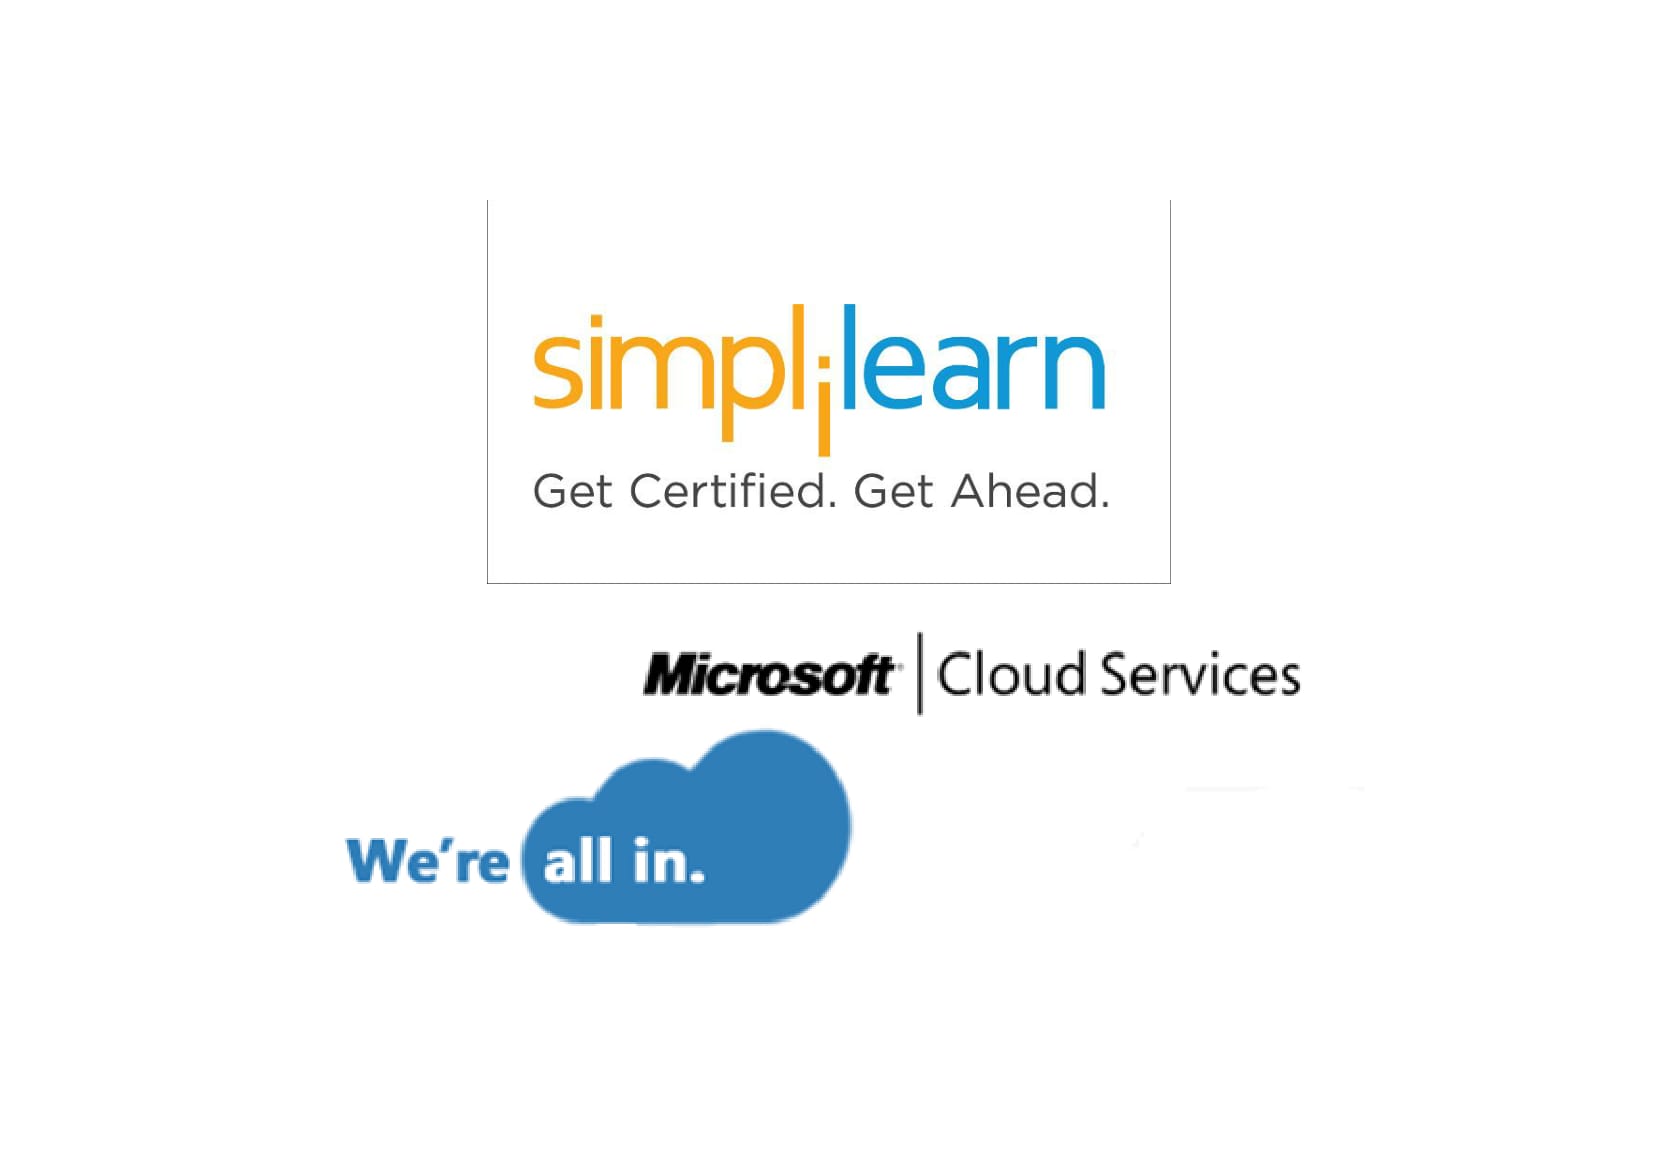 Simplilearn’s blended learning approach combines online classes, instructor-led live virtual classrooms, project work, and 24/7 teaching assistance. More than 40 global training organizations have recognized Simplilearn as an official provider of certification training. The company has been named the 8th most influential education brand in the world by LinkedIn. http://www.simplilearn.com/